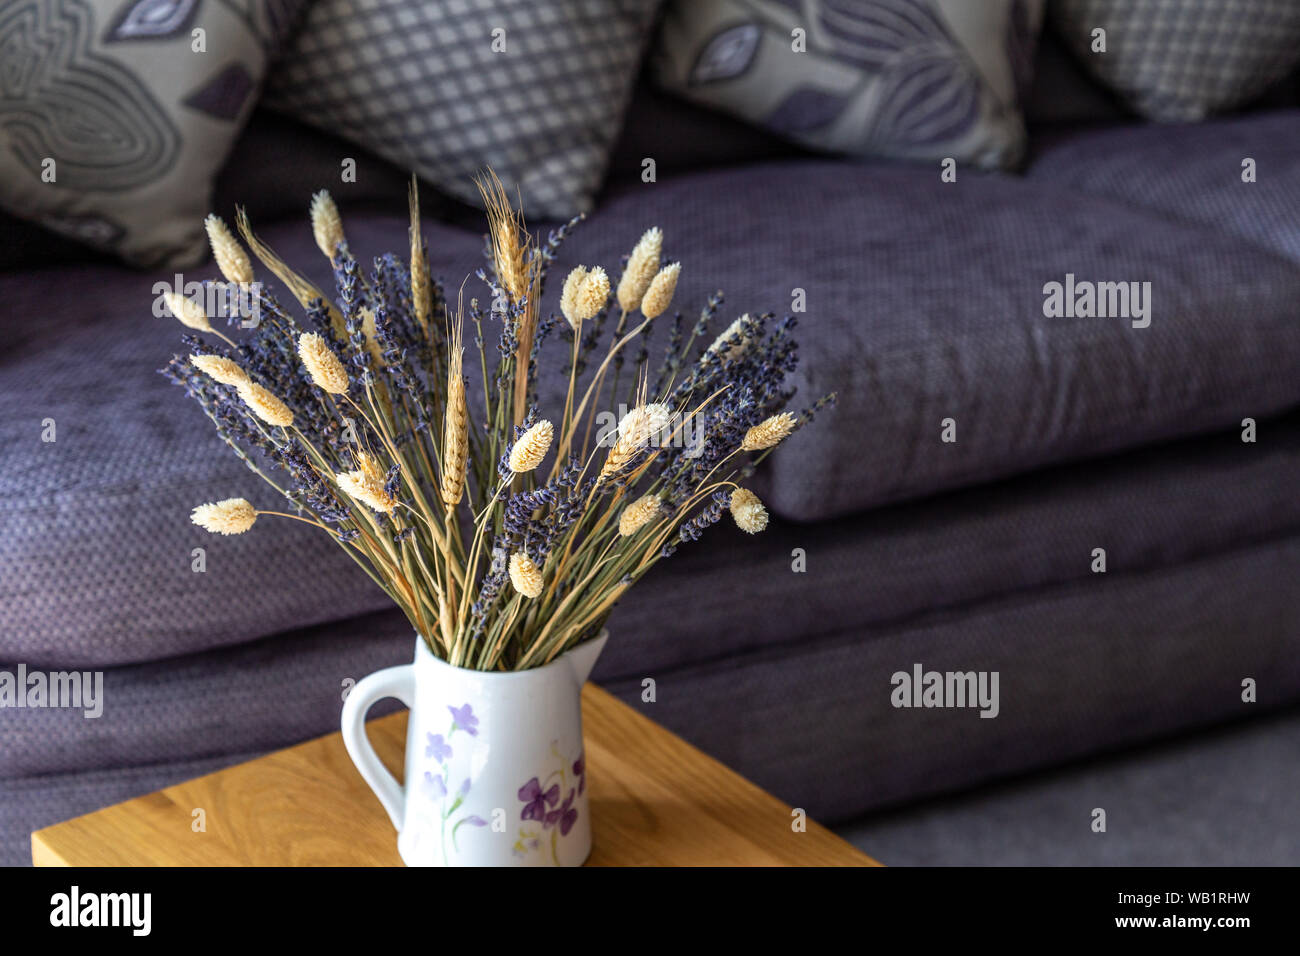 Dried lavender and dried grasses in a jug in a modern setting. Stock Photo